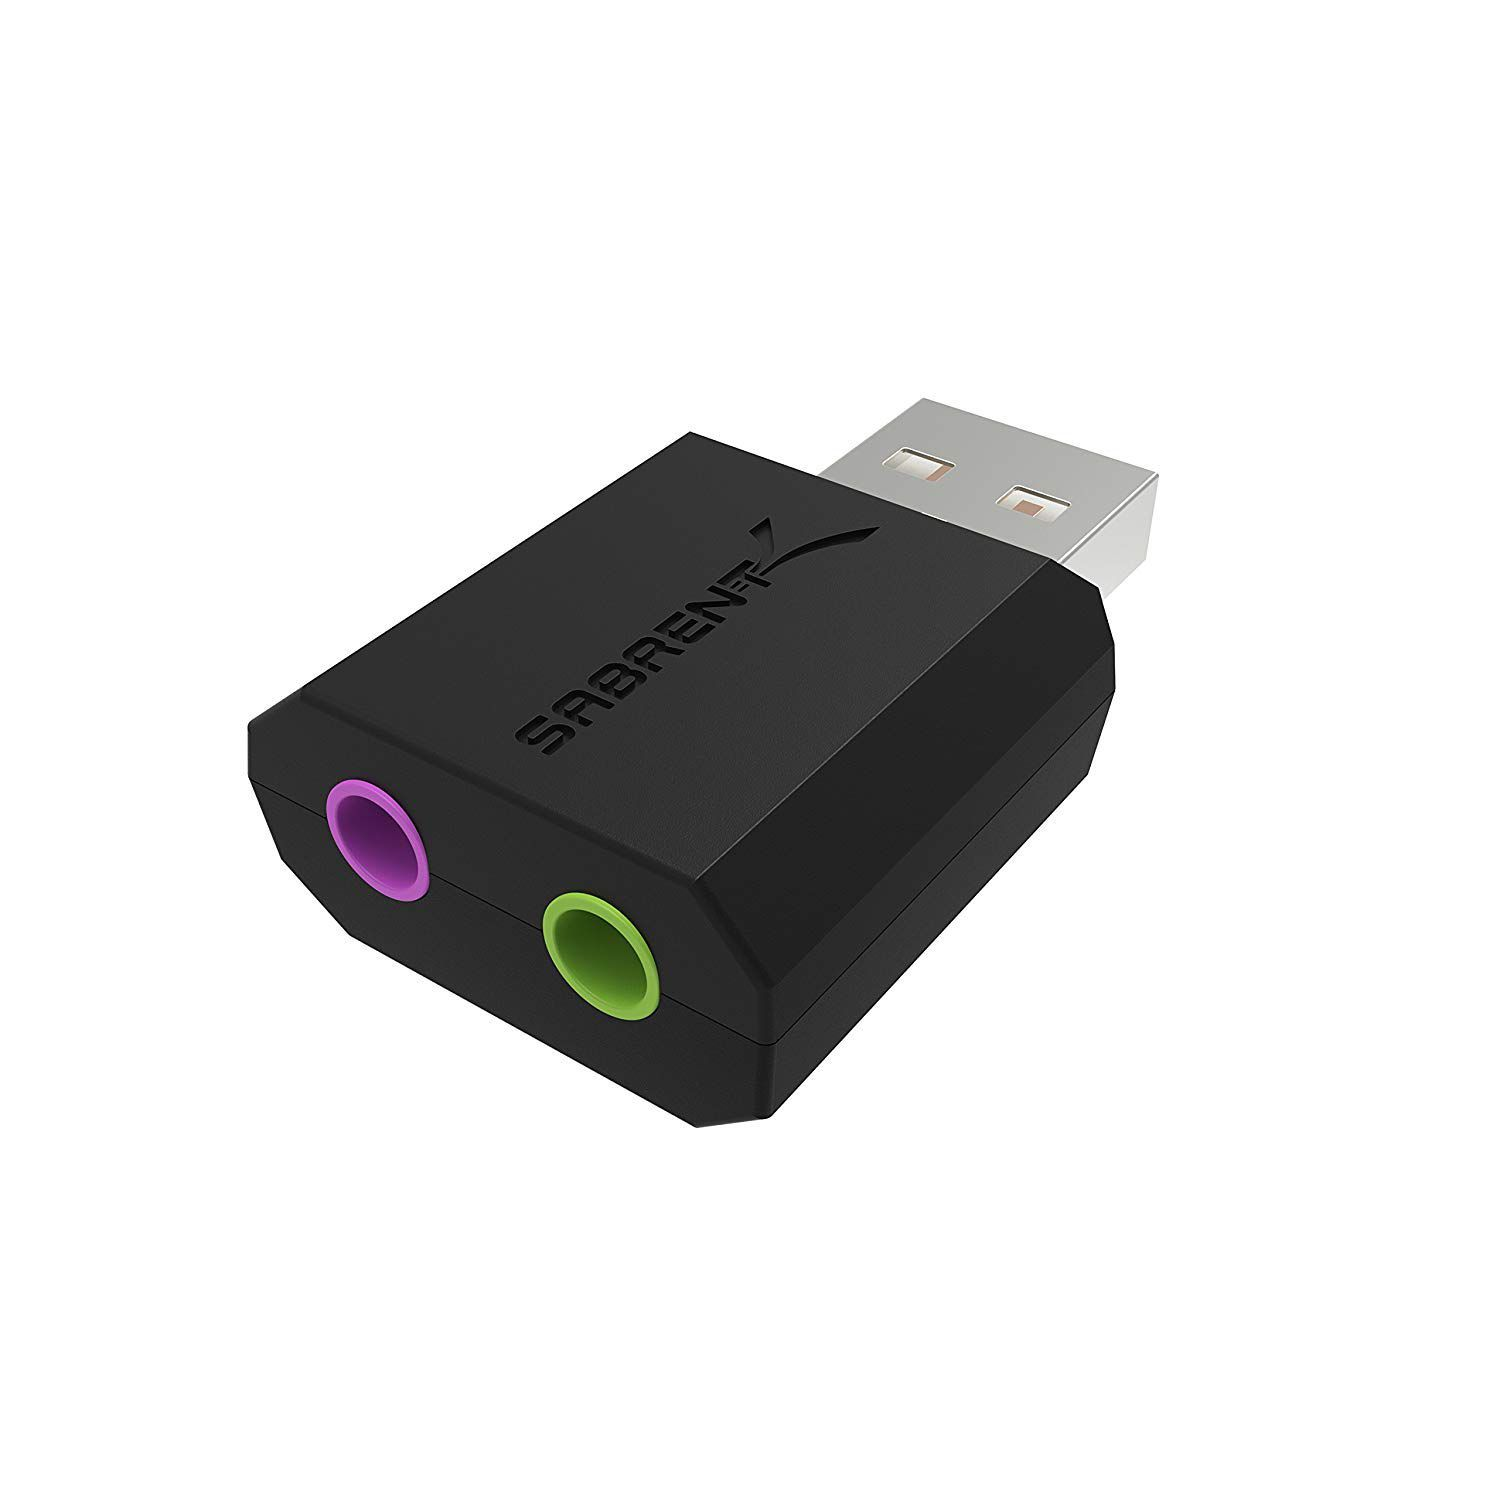 SABRENT USB External Stereo Sound Adapter for Windows and Mac. Plug and Play No Drivers Needed. (AU-MMSA)